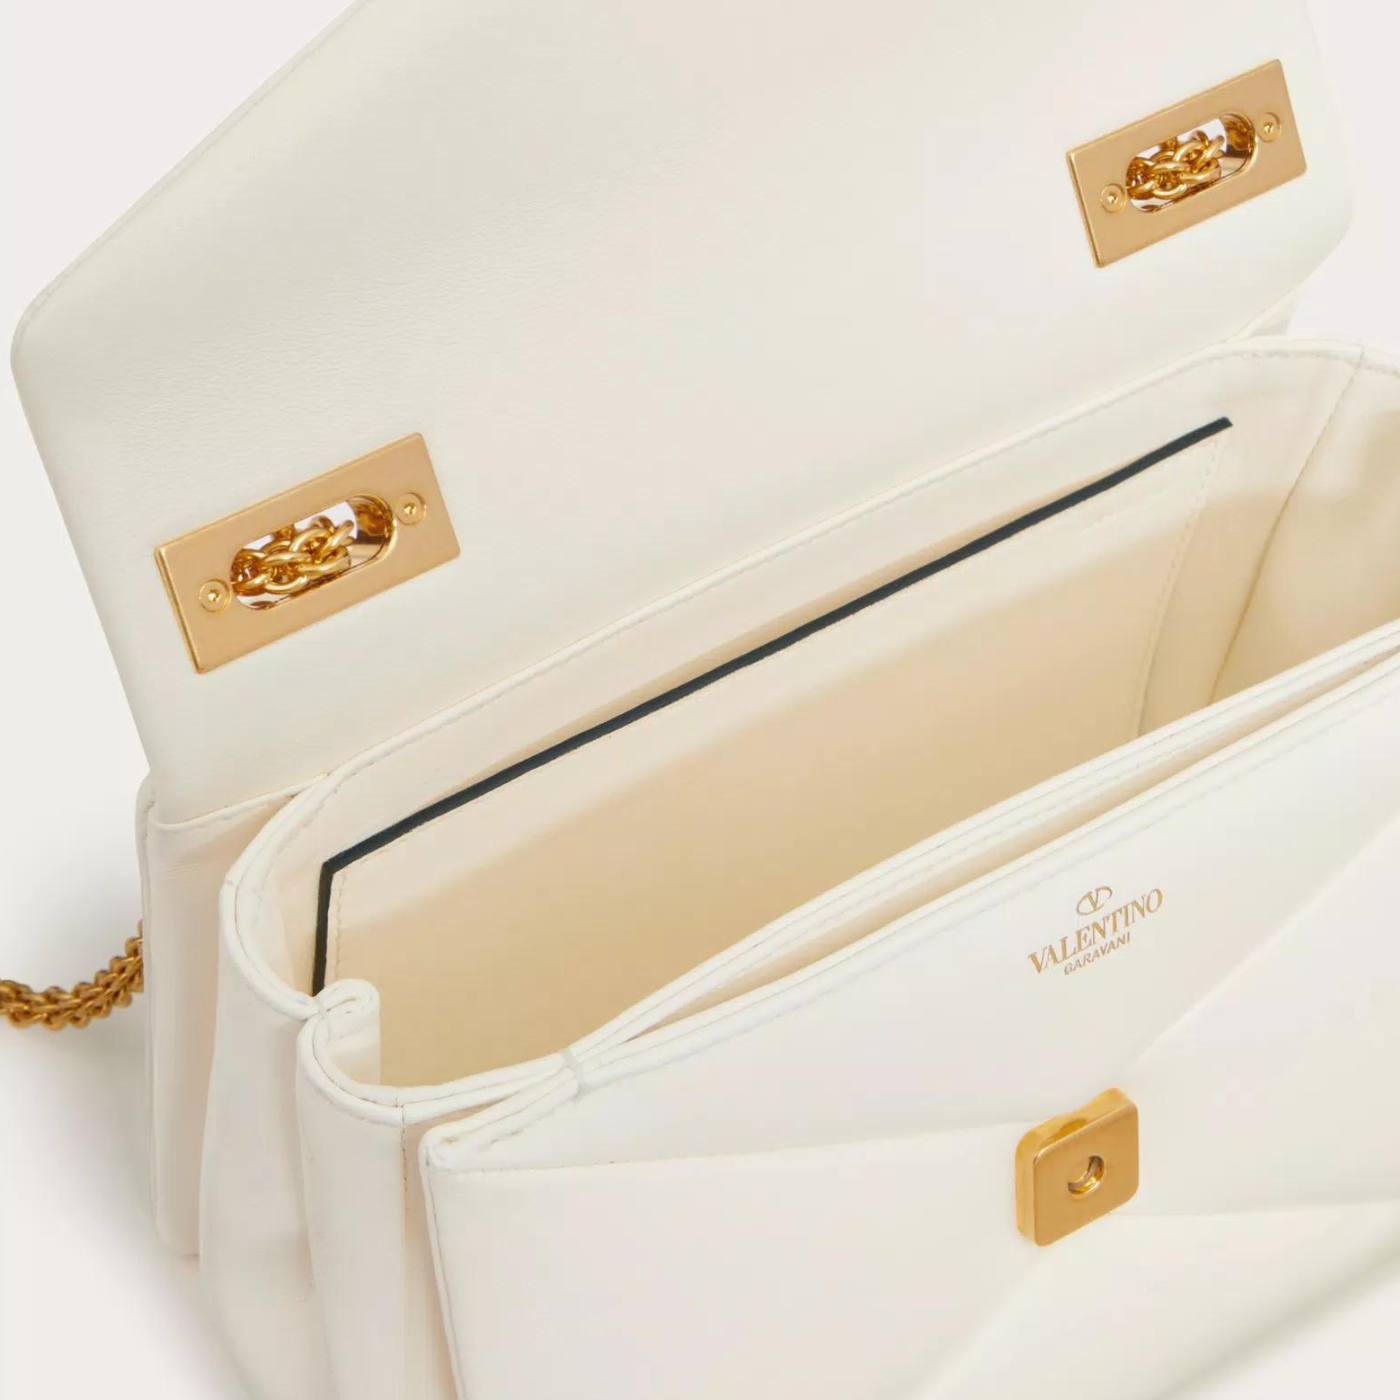 One Stud Nappa Bag With Chain In Ivory Handbags VALENTINO - LOLAMIR